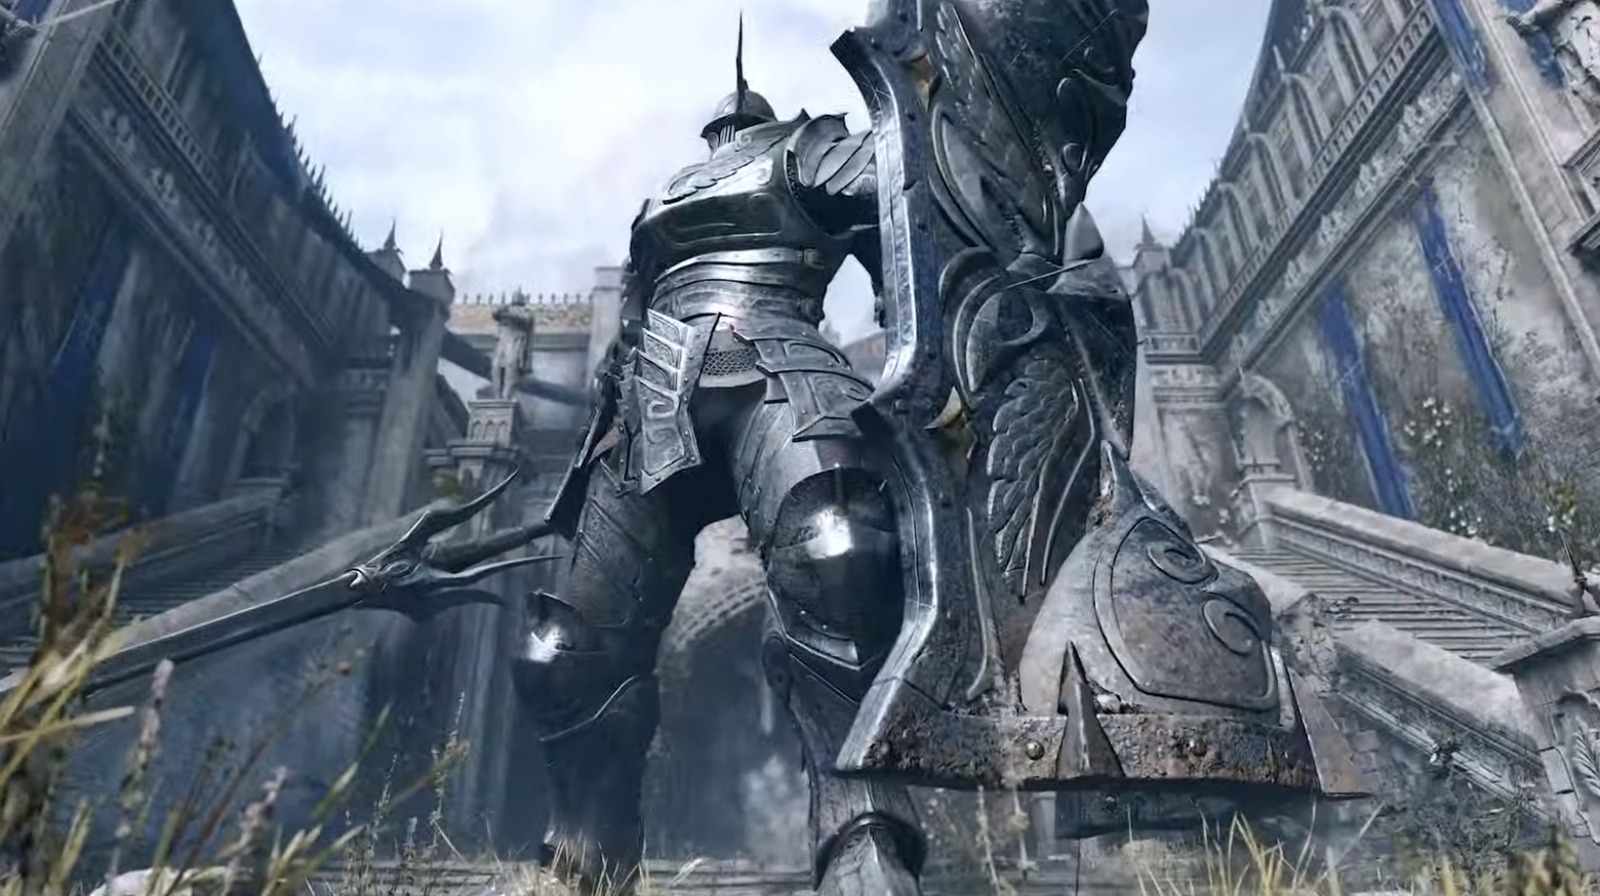 The Real Reason Demon's Souls Changed Its Name